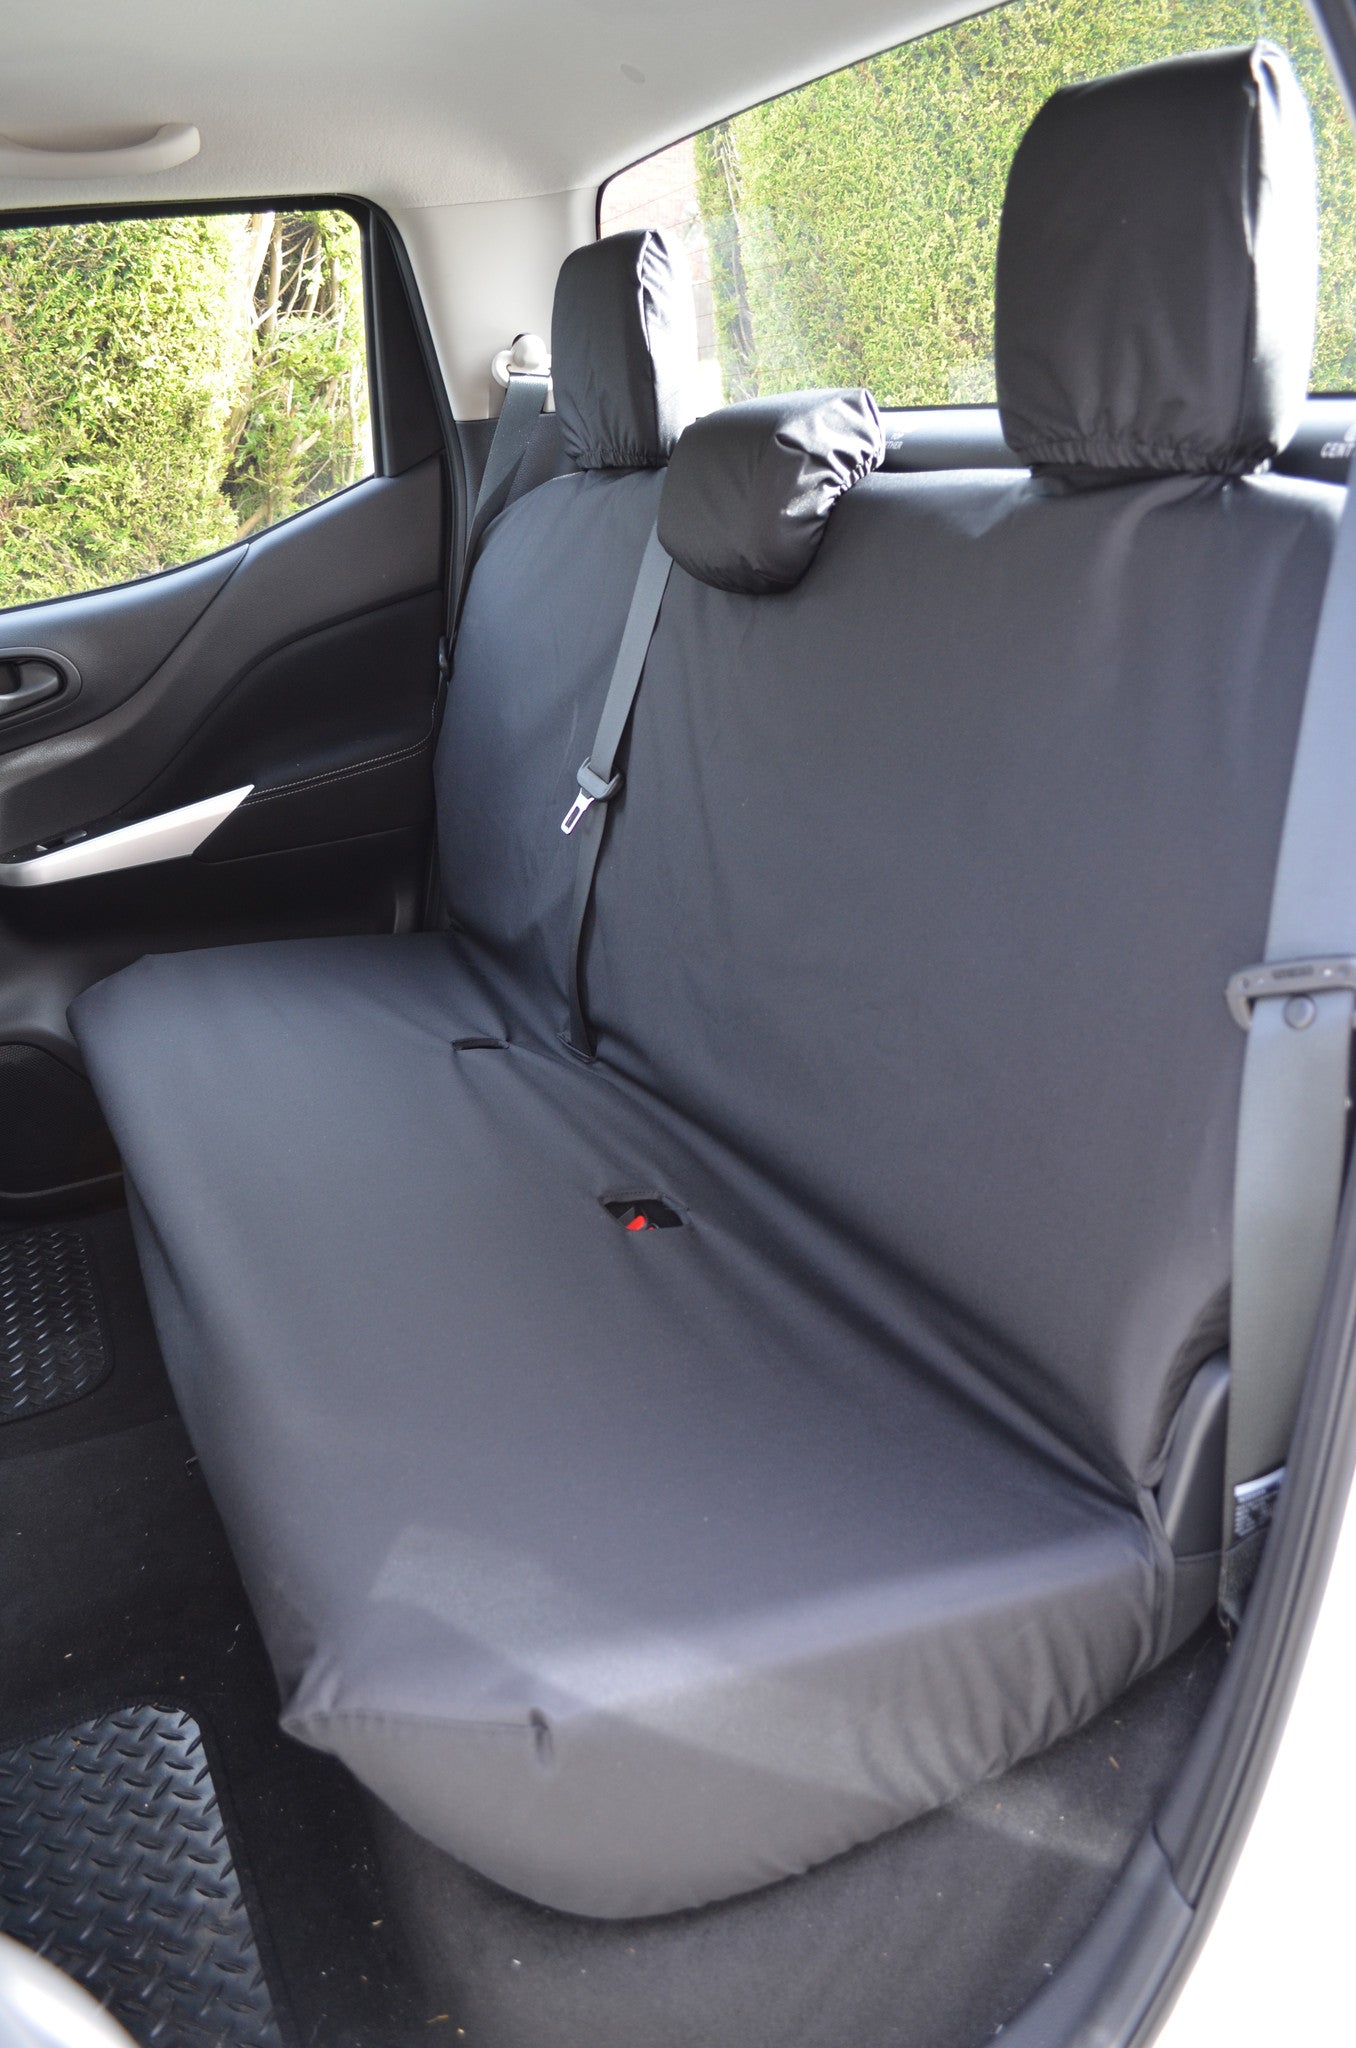 Nissan Navara NP300 Double Cab (2016 Onwards) Tailored Seat Covers Rear Seats / Black Turtle Covers Ltd